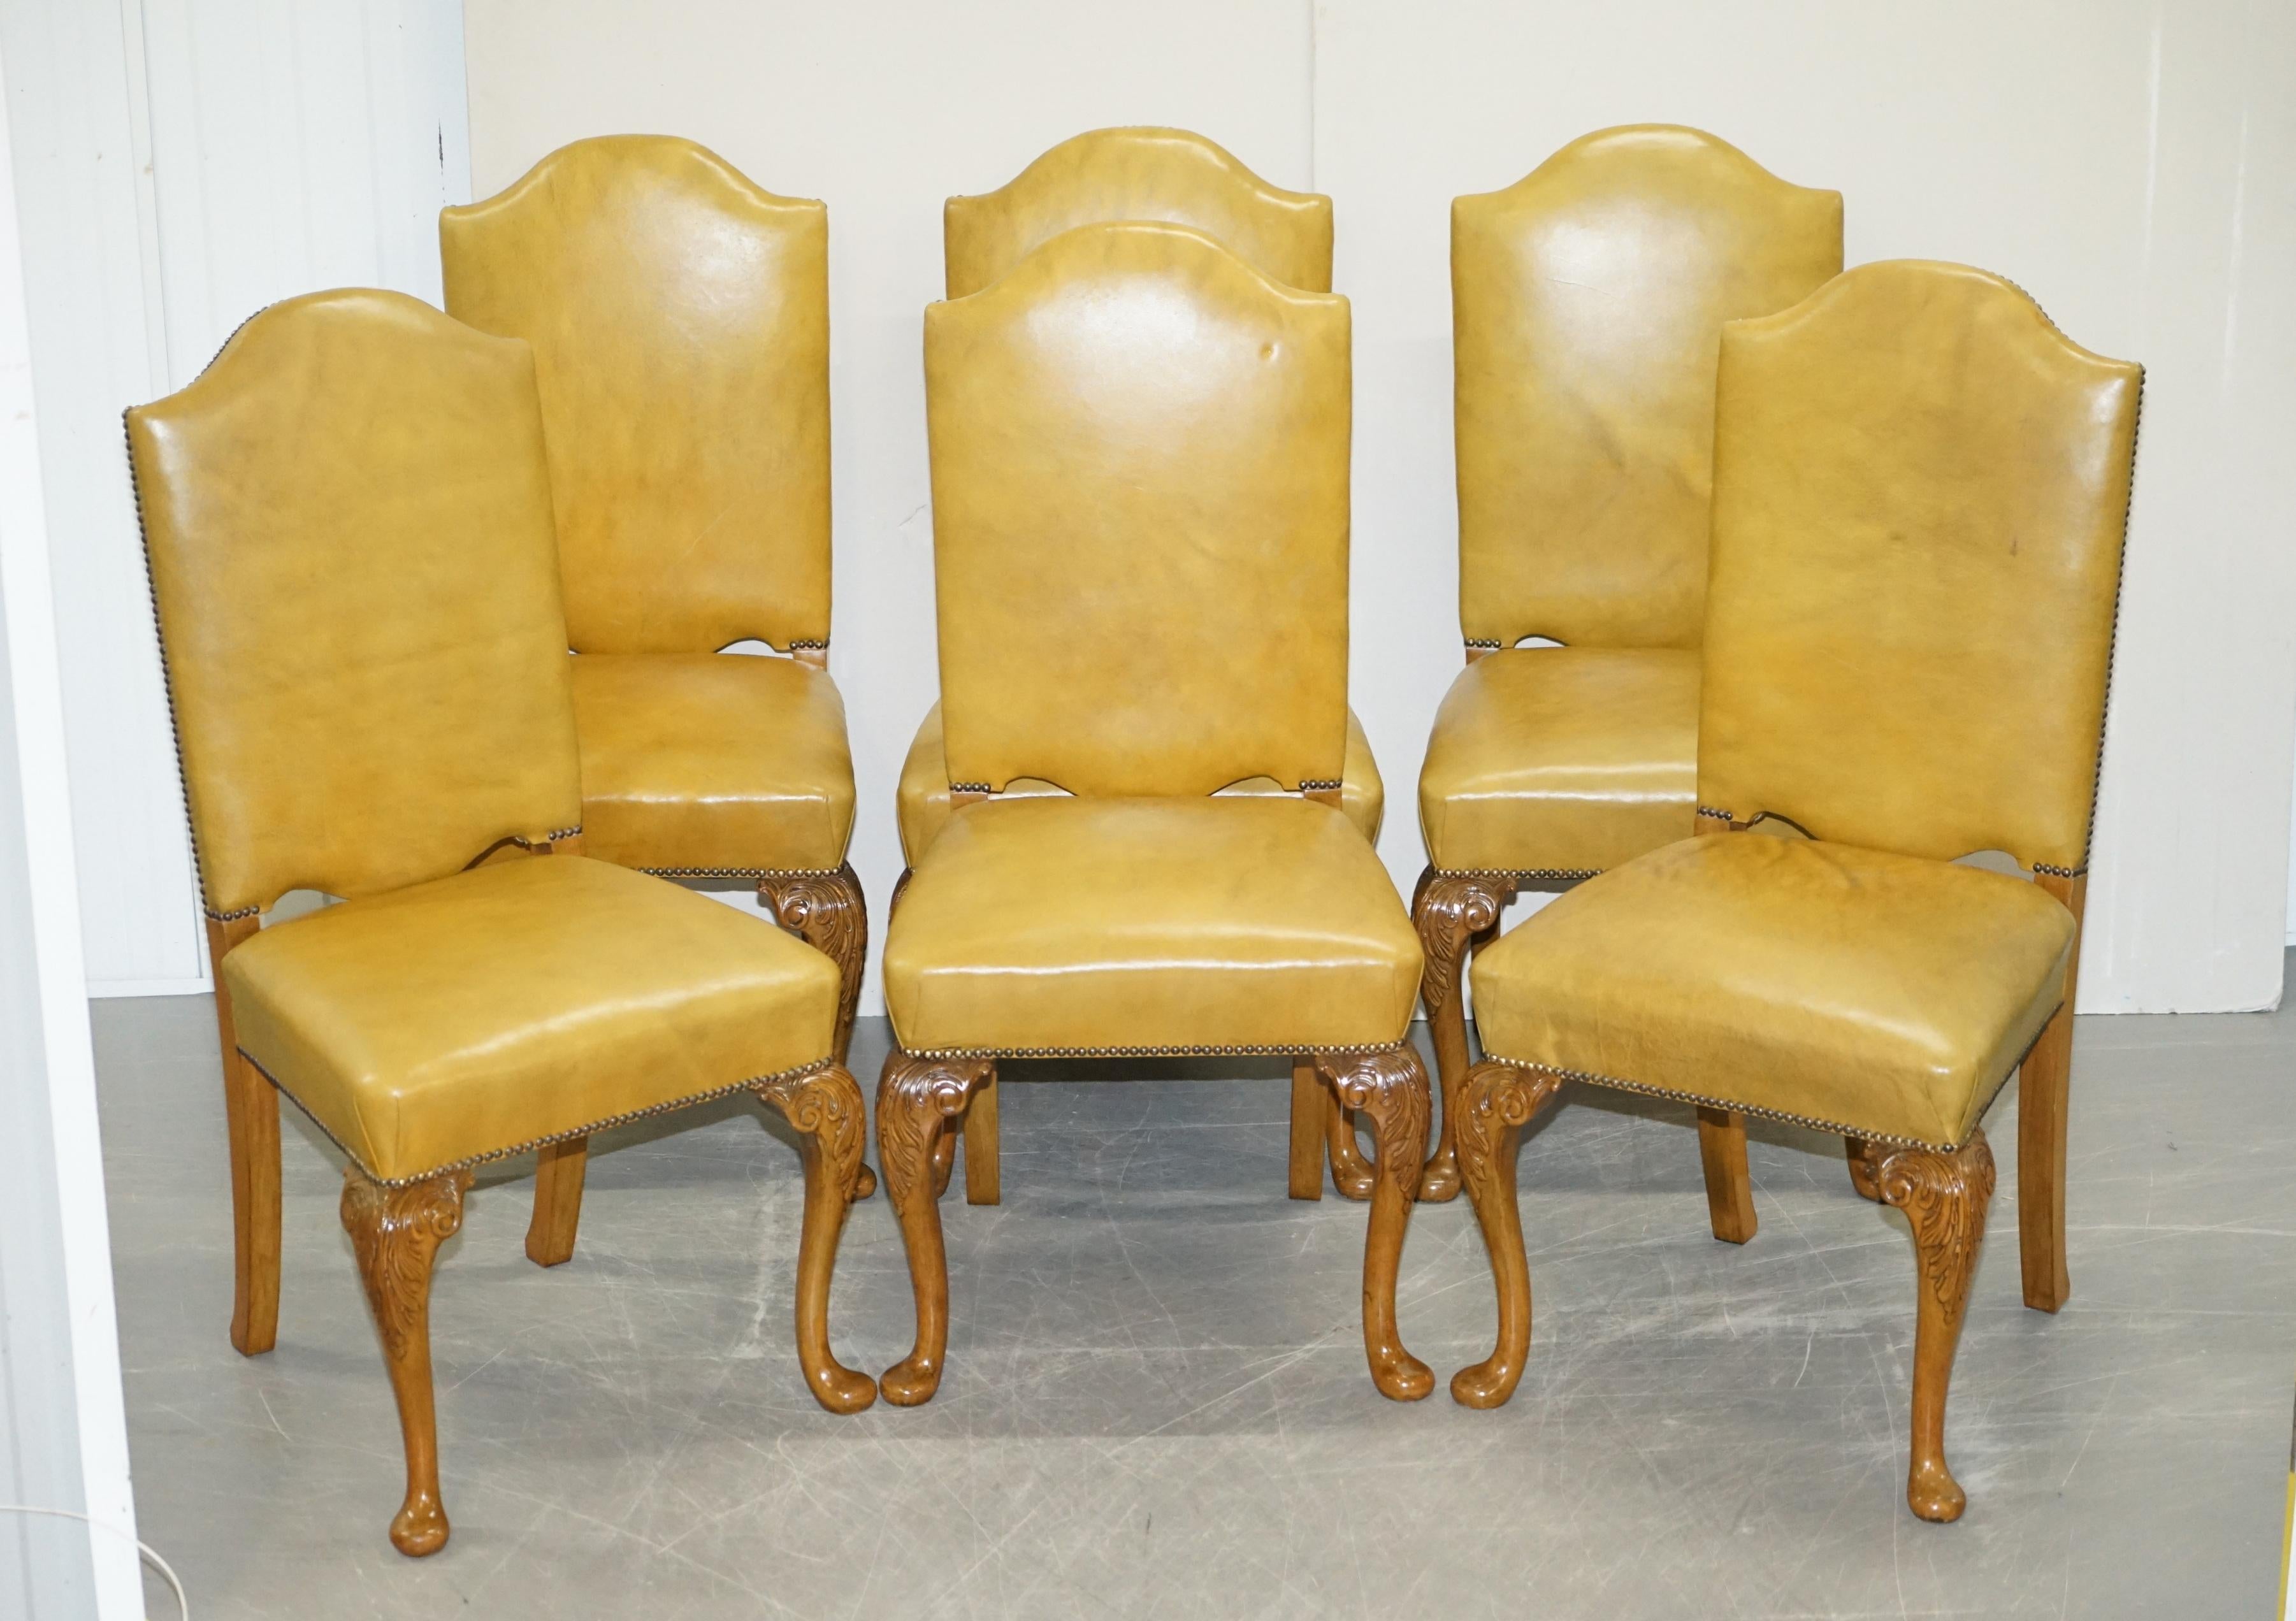 We are delighted to this stunning suite of eight Denby & Spinks Art Deco carved Walnut dining chairs with pale green leather upholstery

These are part of a suite, in total I have 8 dining chairs, an extending dining table, large inverted